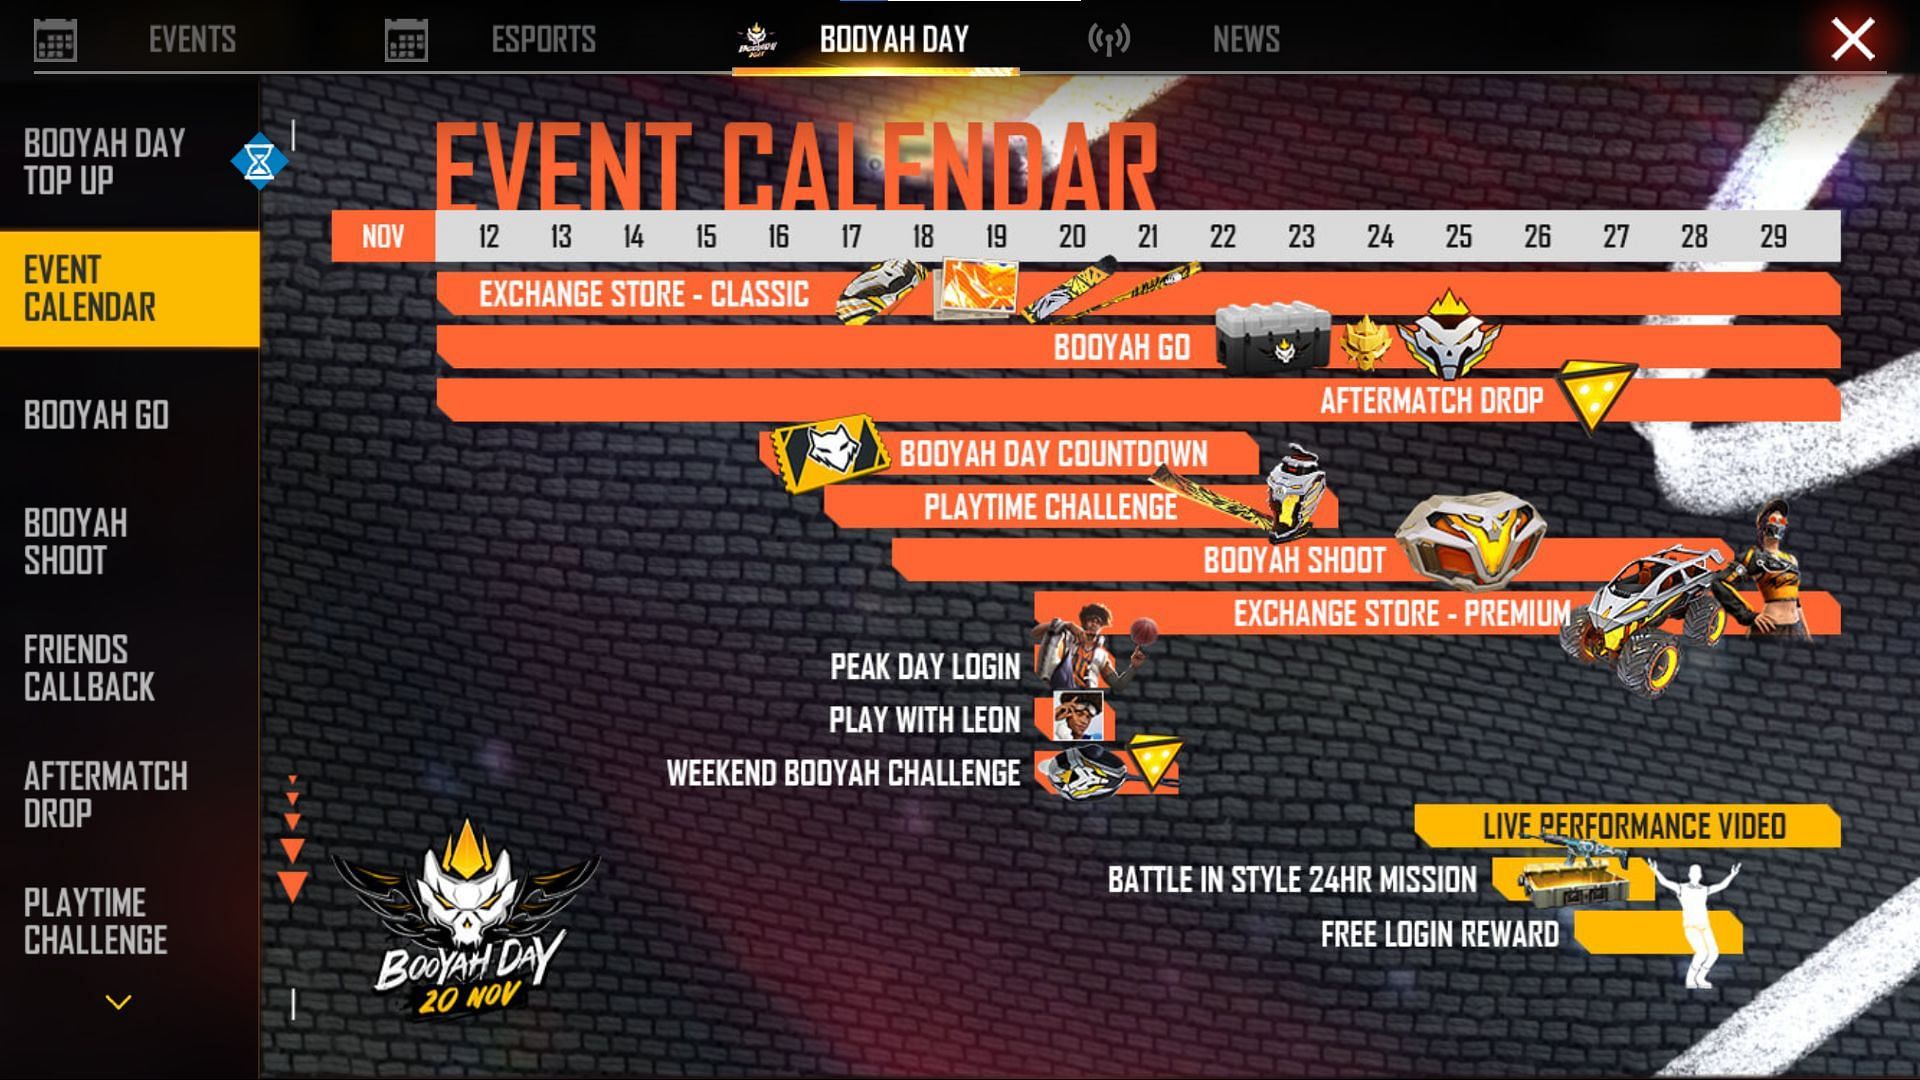 This is the calendar of the ongoing Booyah Day events in Free Fire (Image via Free Fire)